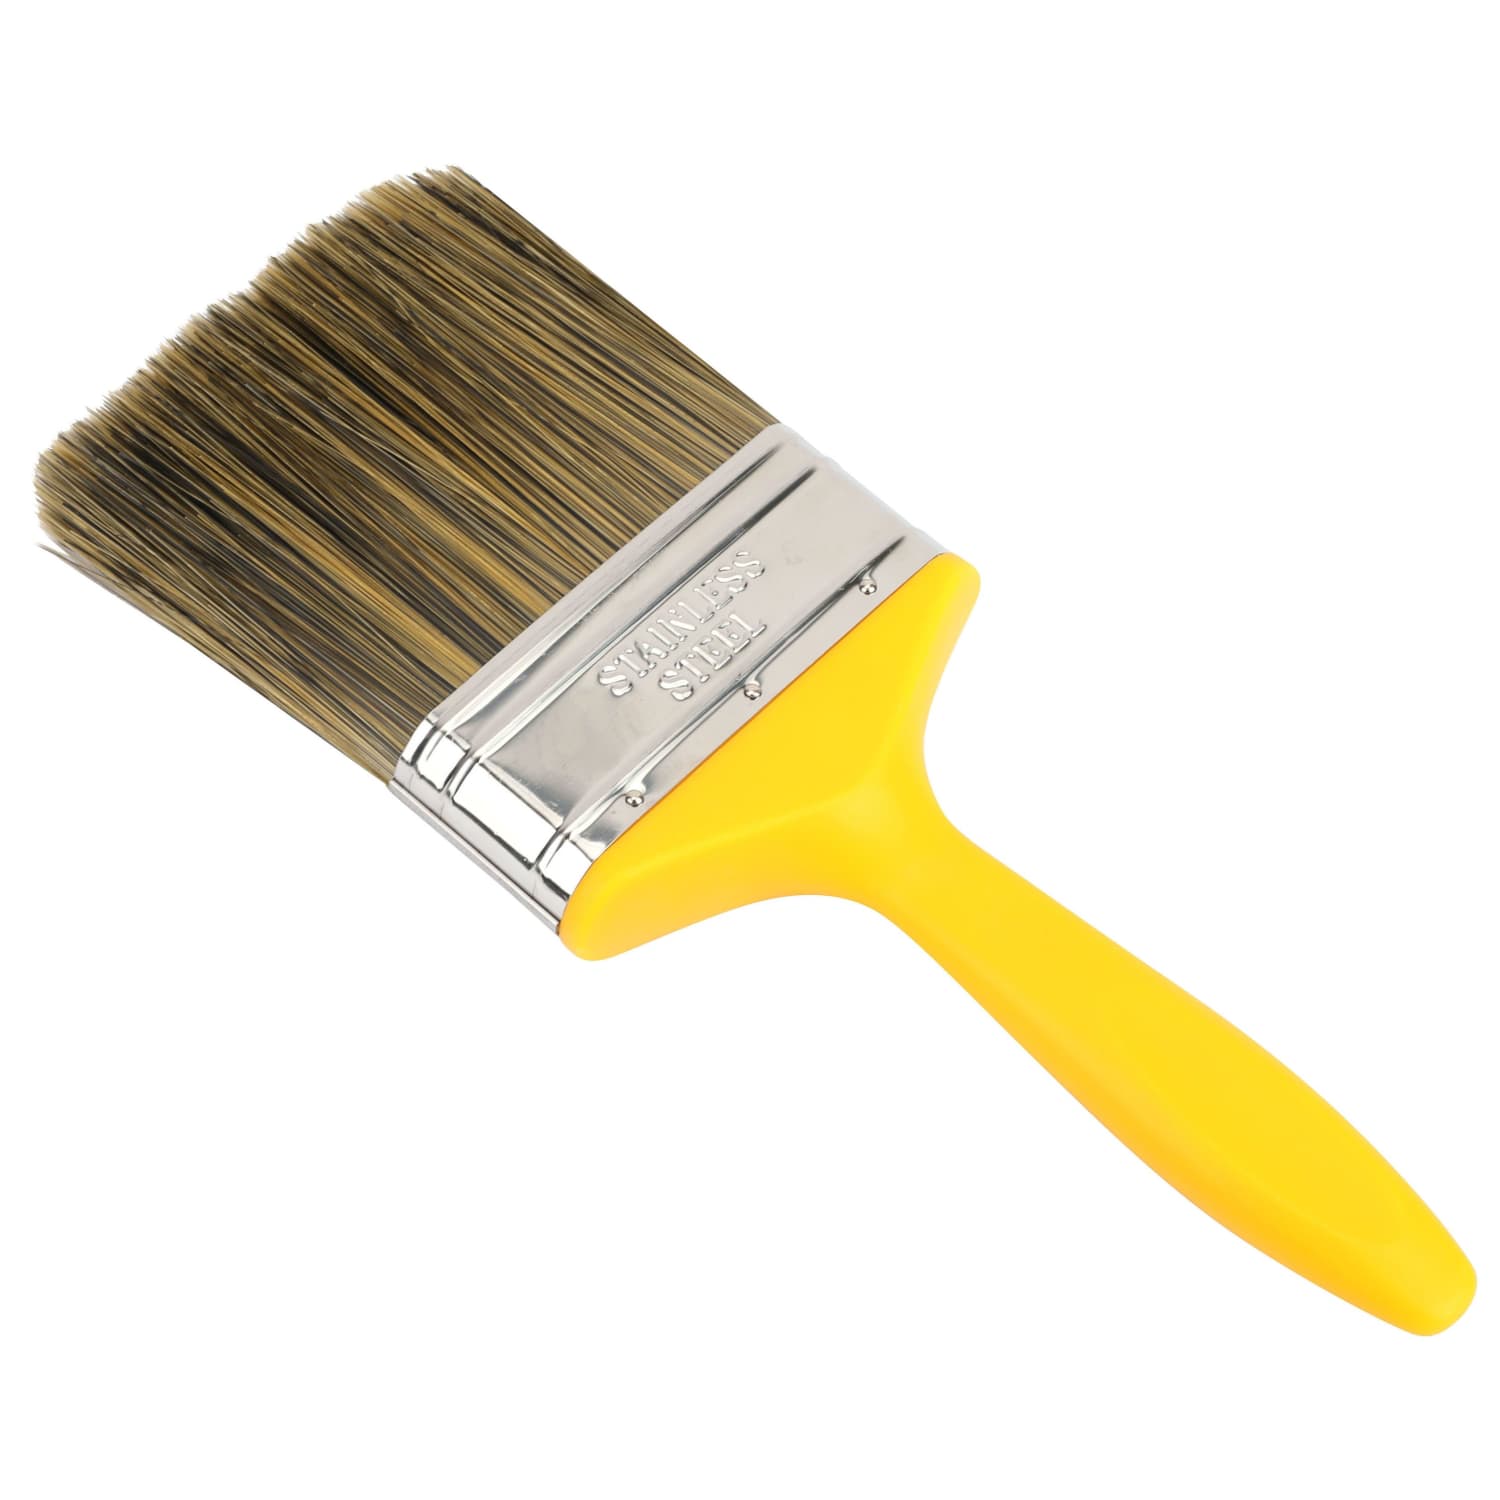 brush - Wiktionary, the free dictionary